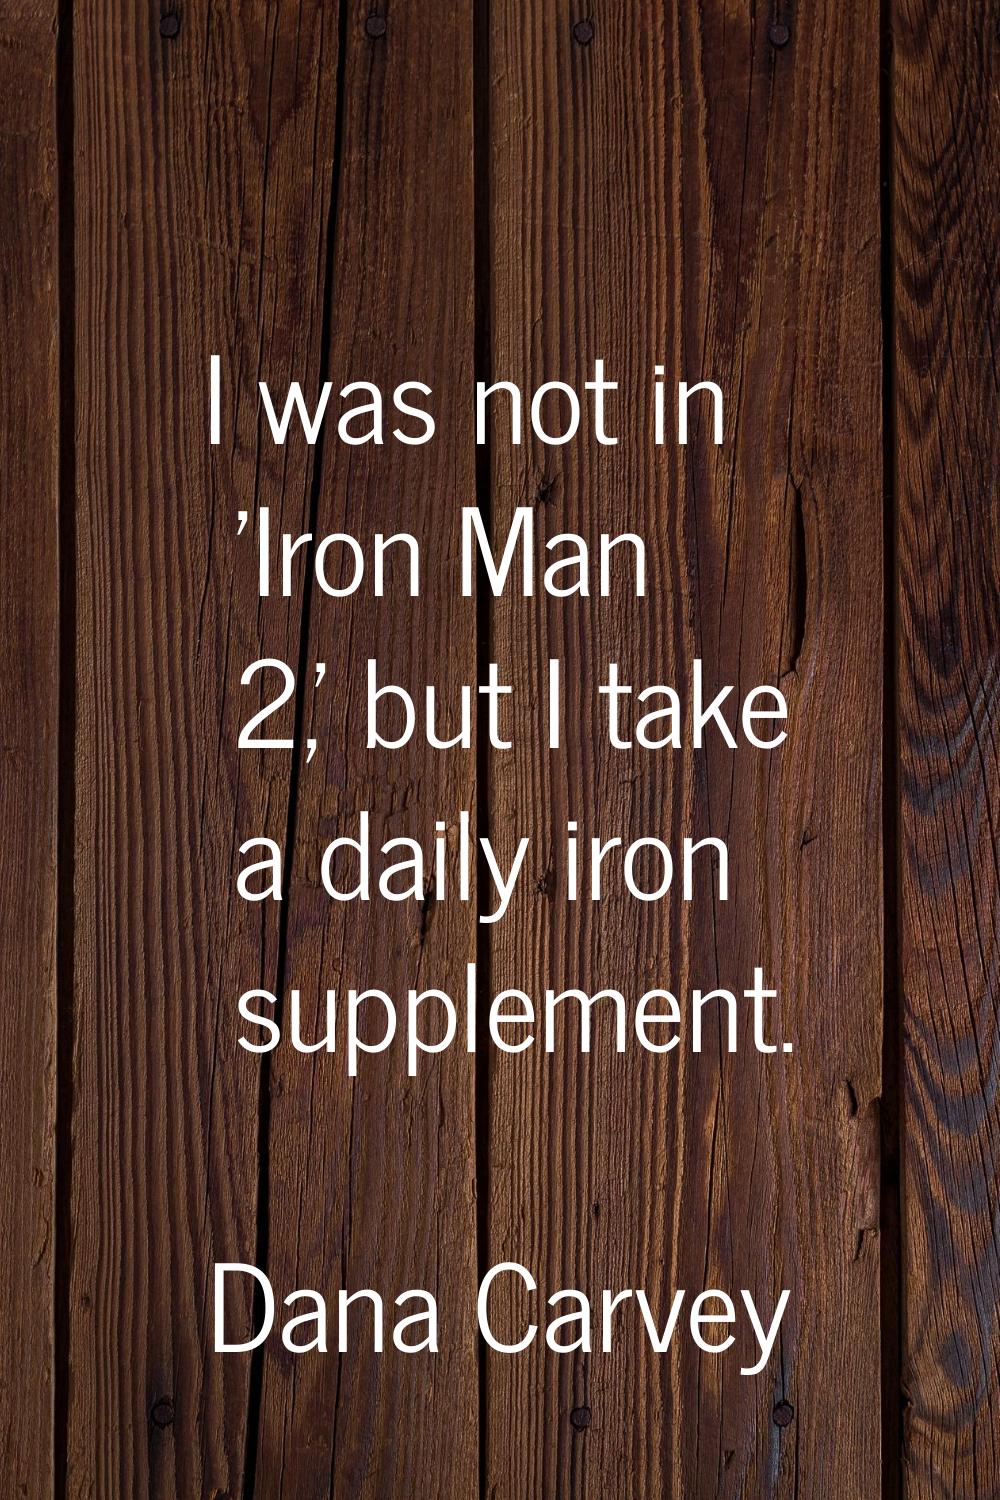 I was not in 'Iron Man 2,' but I take a daily iron supplement.